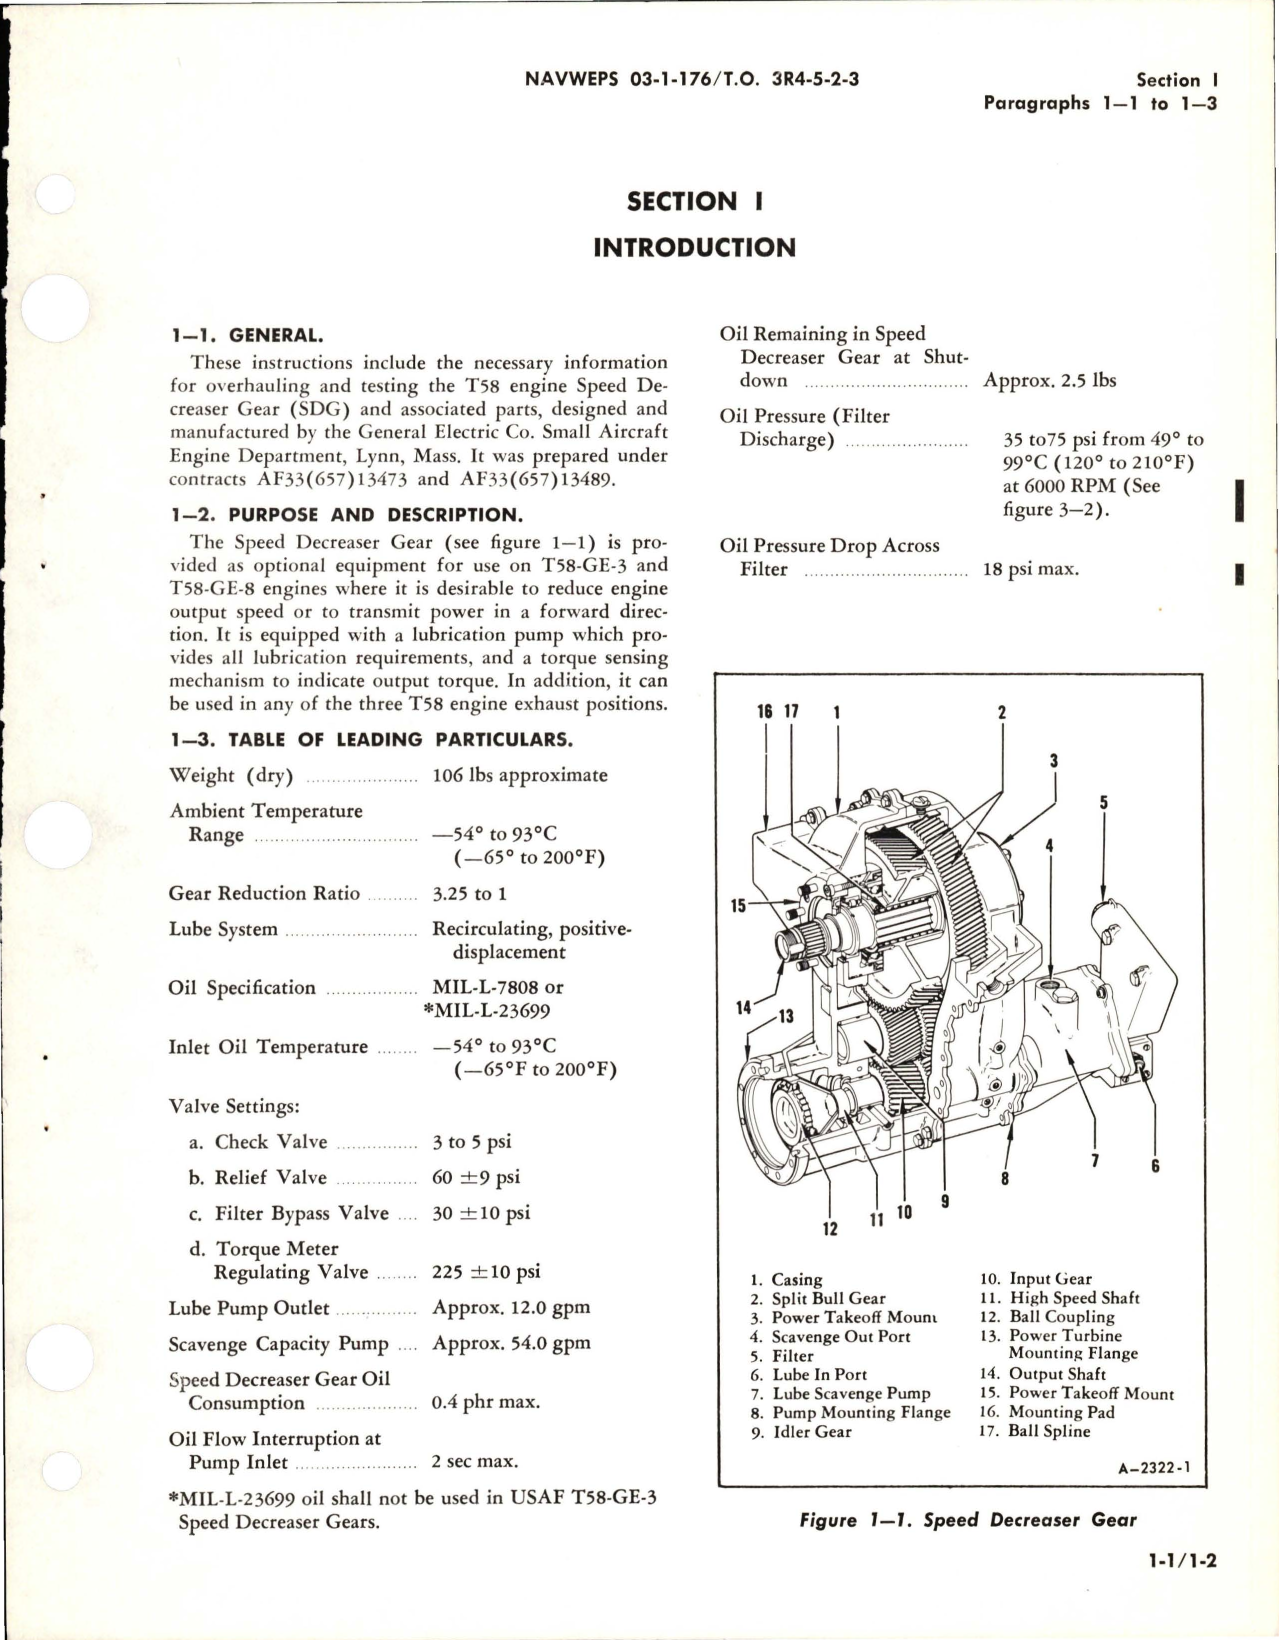 Sample page 5 from AirCorps Library document: Overhaul Instructions for Speed Decreaser Gear and Associated Parts - Parts 37R600175G001 and 37R600175G009 